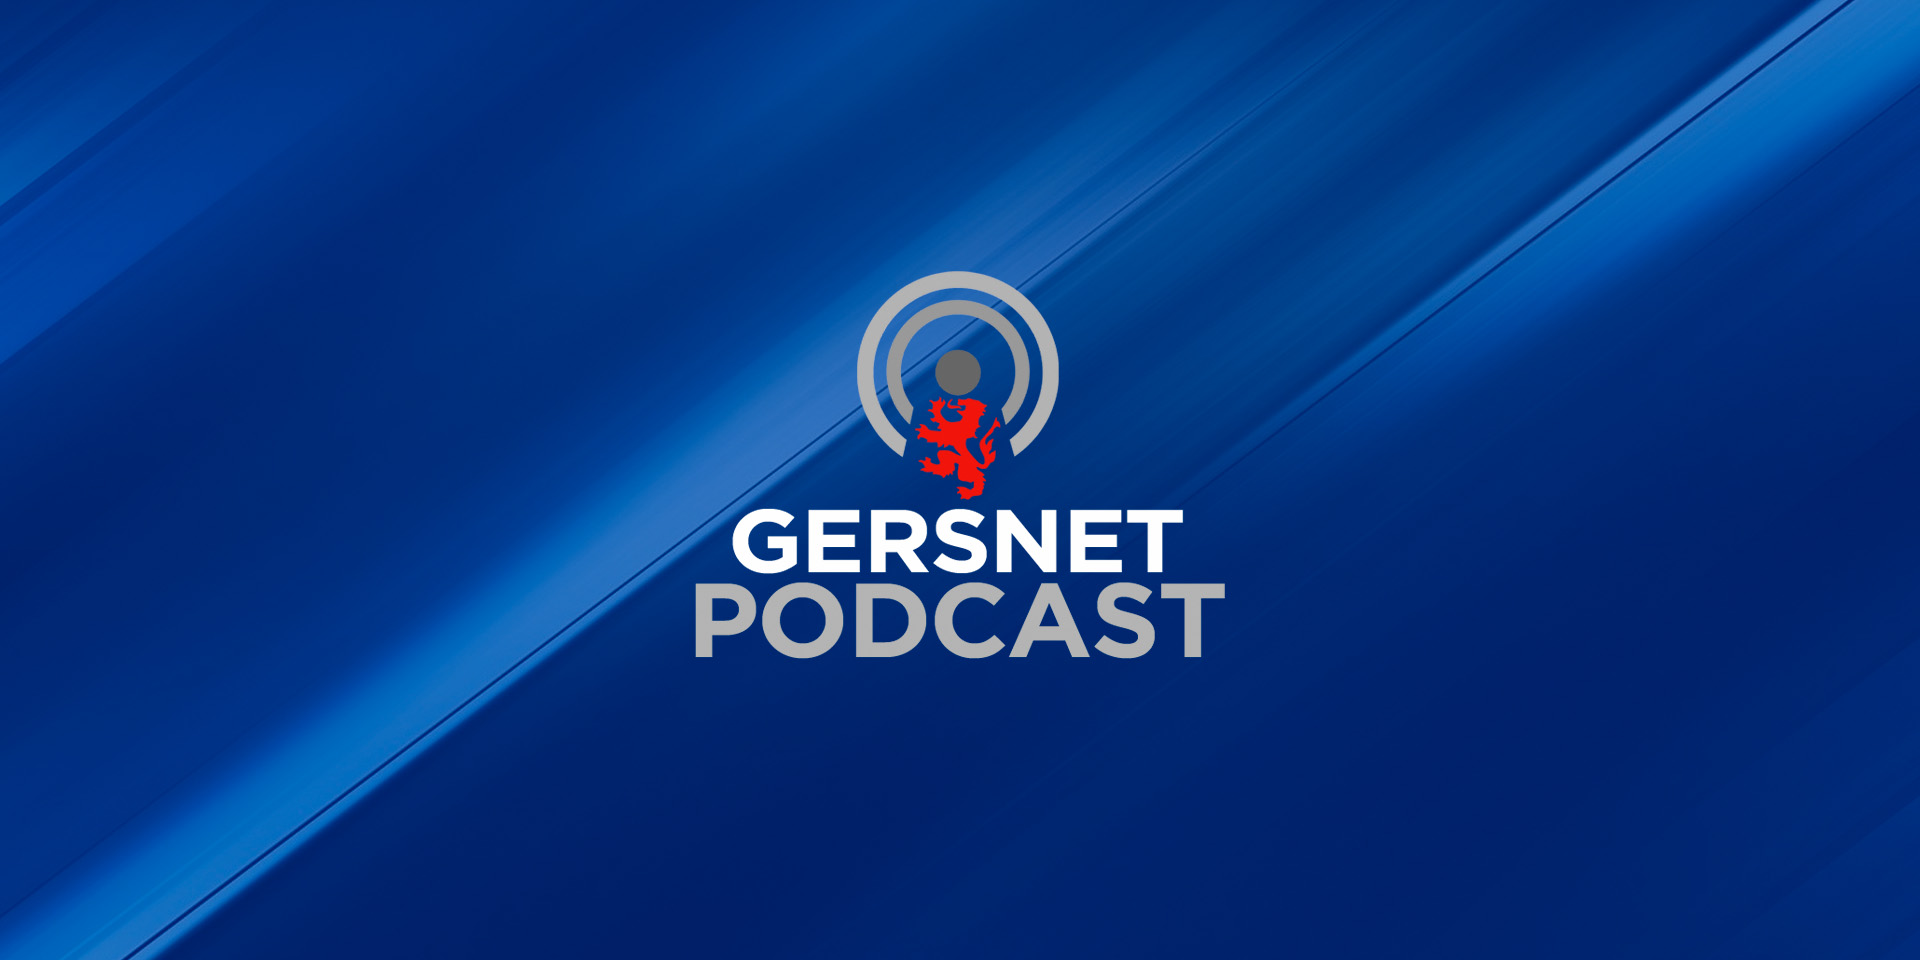 Gersnet Podcast 289 - Going, going, gone...